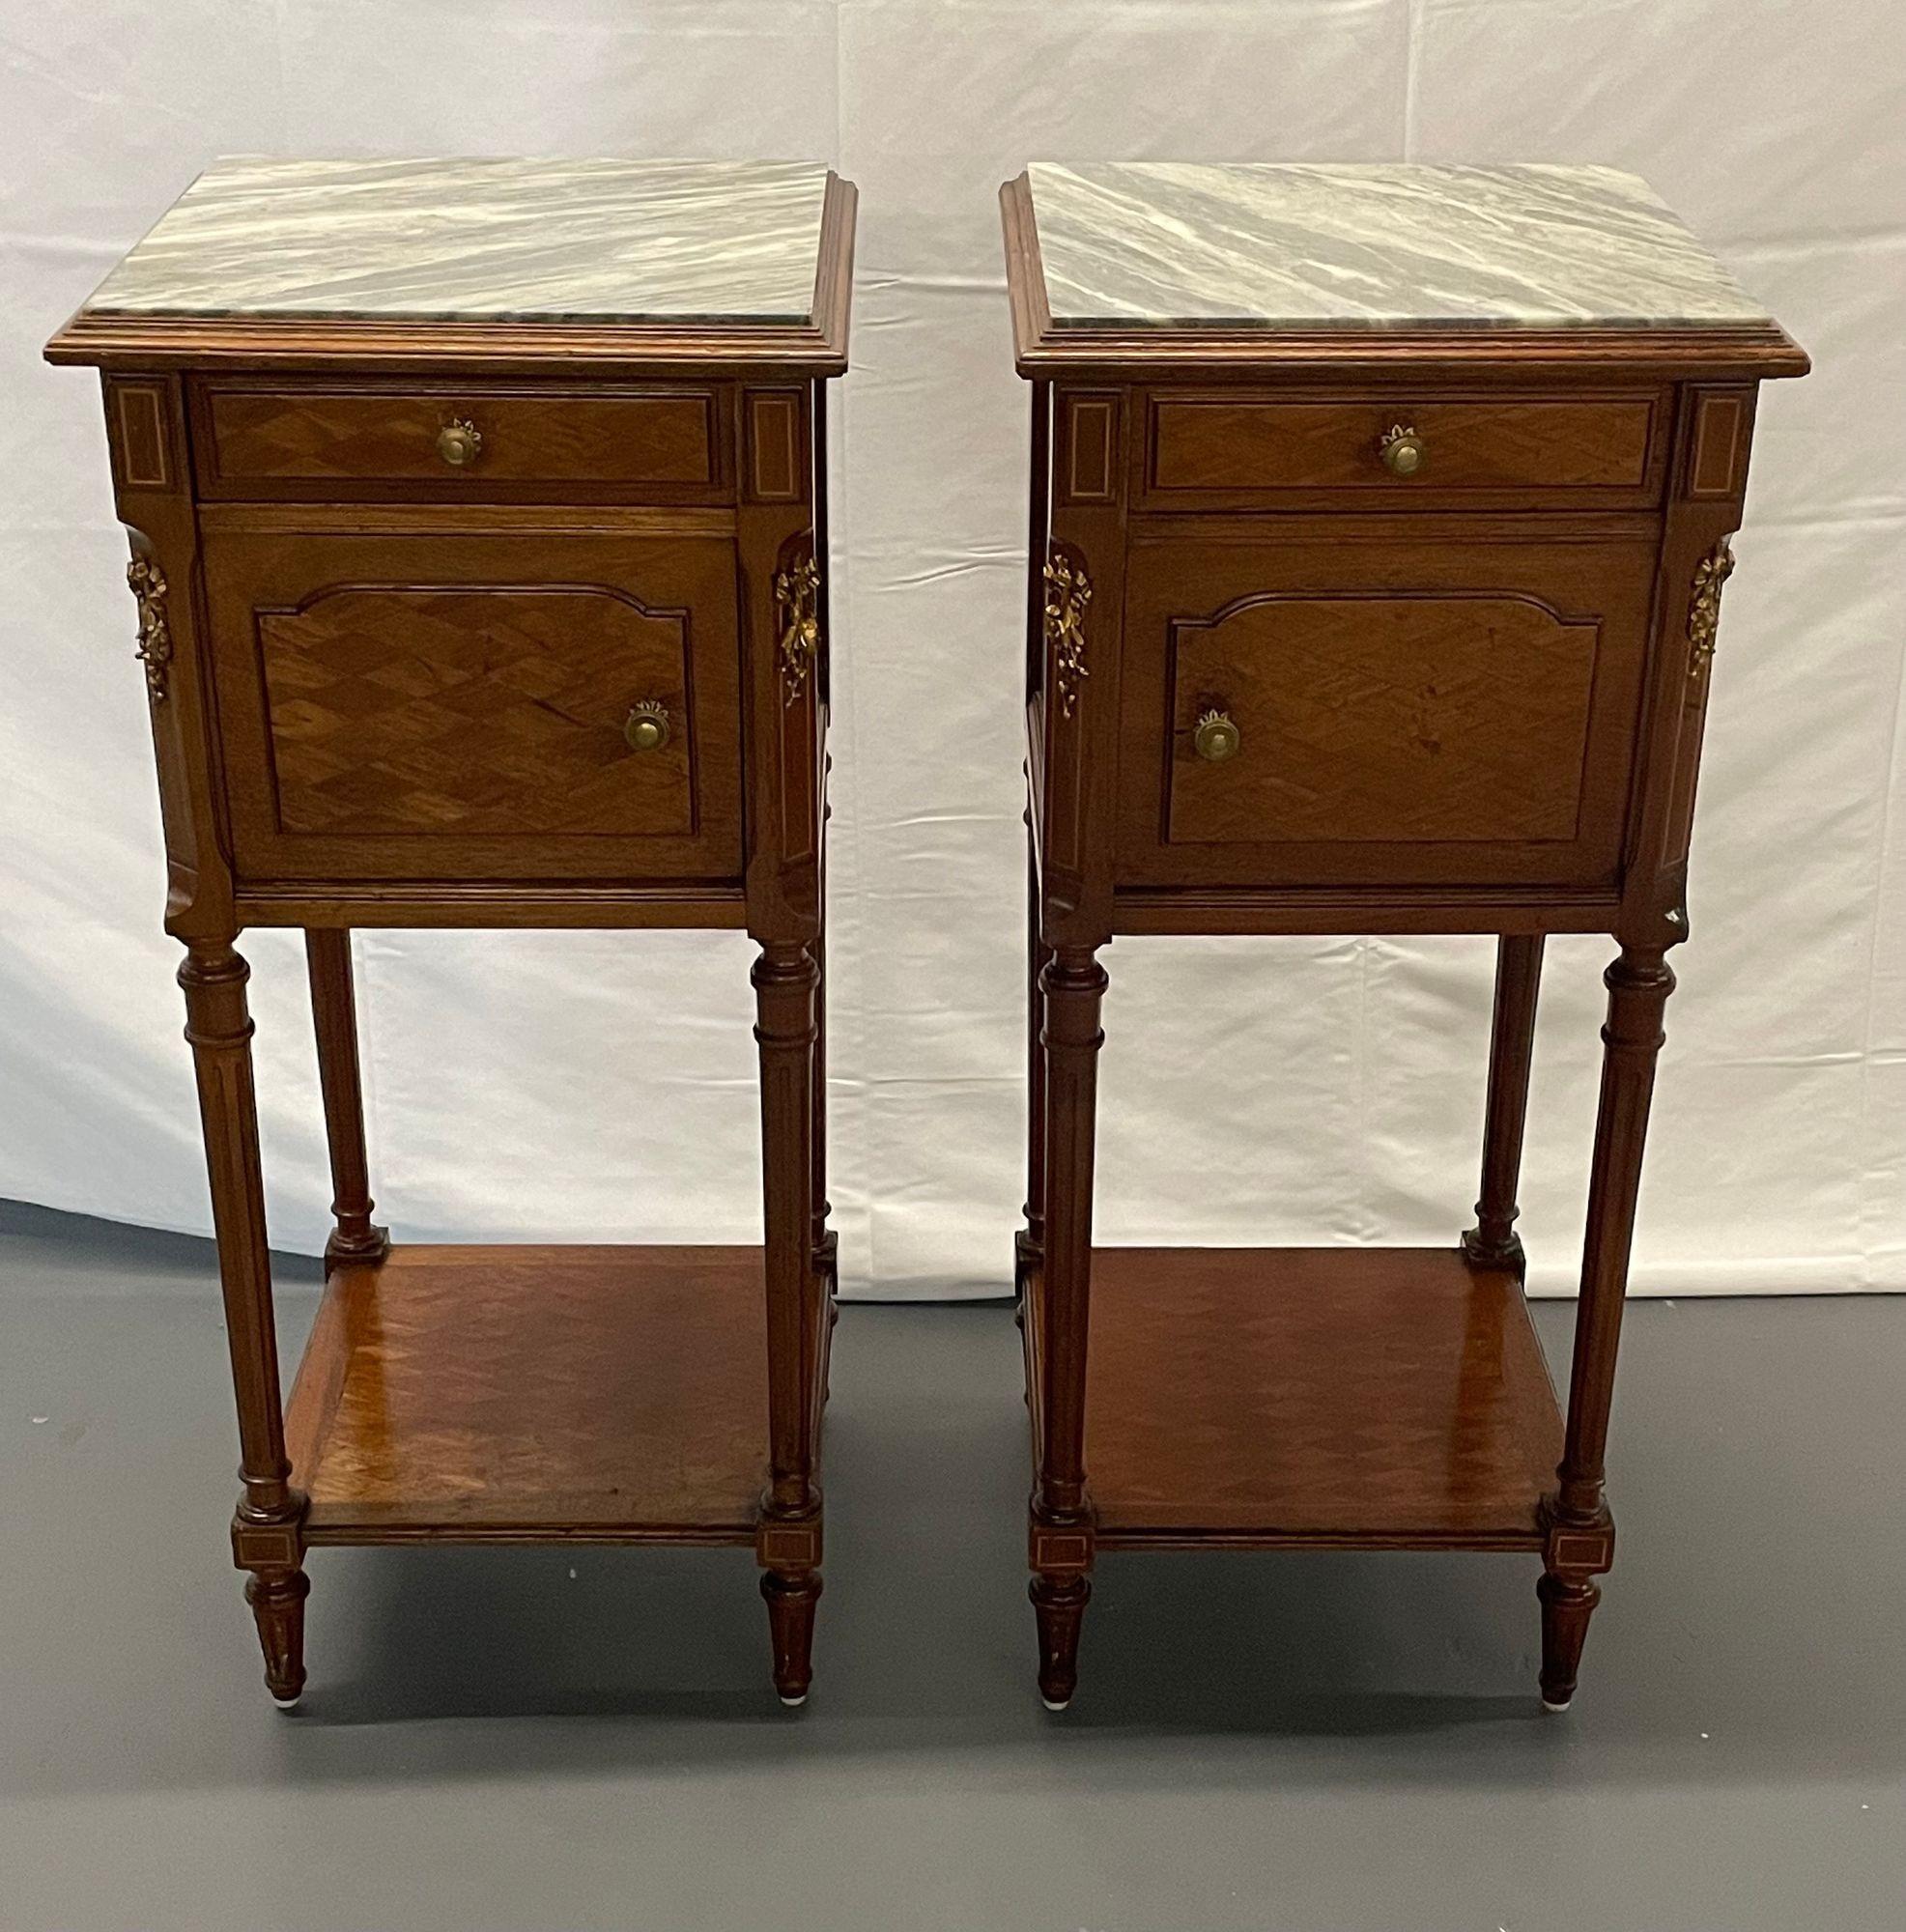 Pair Louis XVI Style End, Bedside Tables, Humidor Interiors, Parquetry Inlaid, Circa 1910
 
A lovely pair of Louis XVI Style marble top end or bedside tables. Each one opens to a marble lined interior cabinet, perhaps intended for humidor use.  The